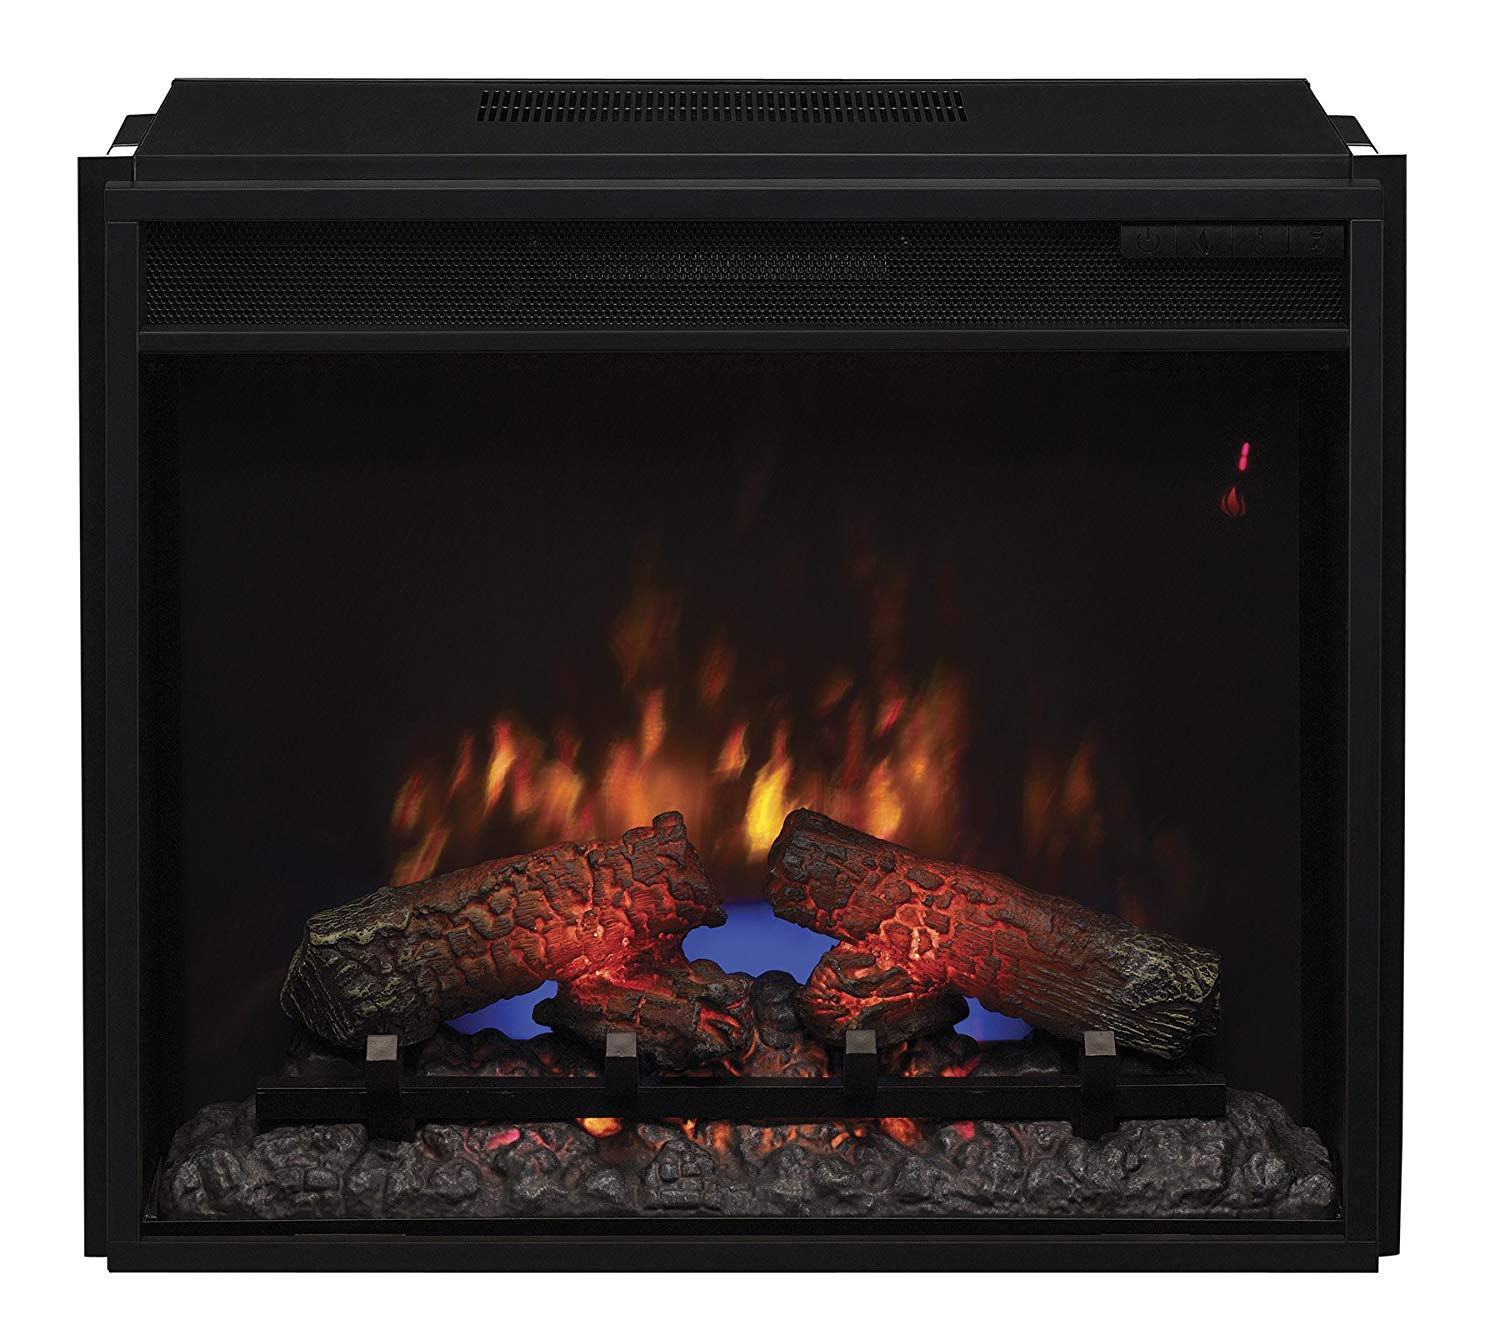 Menards Fireplace Mantel Best Of Classicflame 23ef031grp 23" Electric Fireplace Insert with Safer Plug